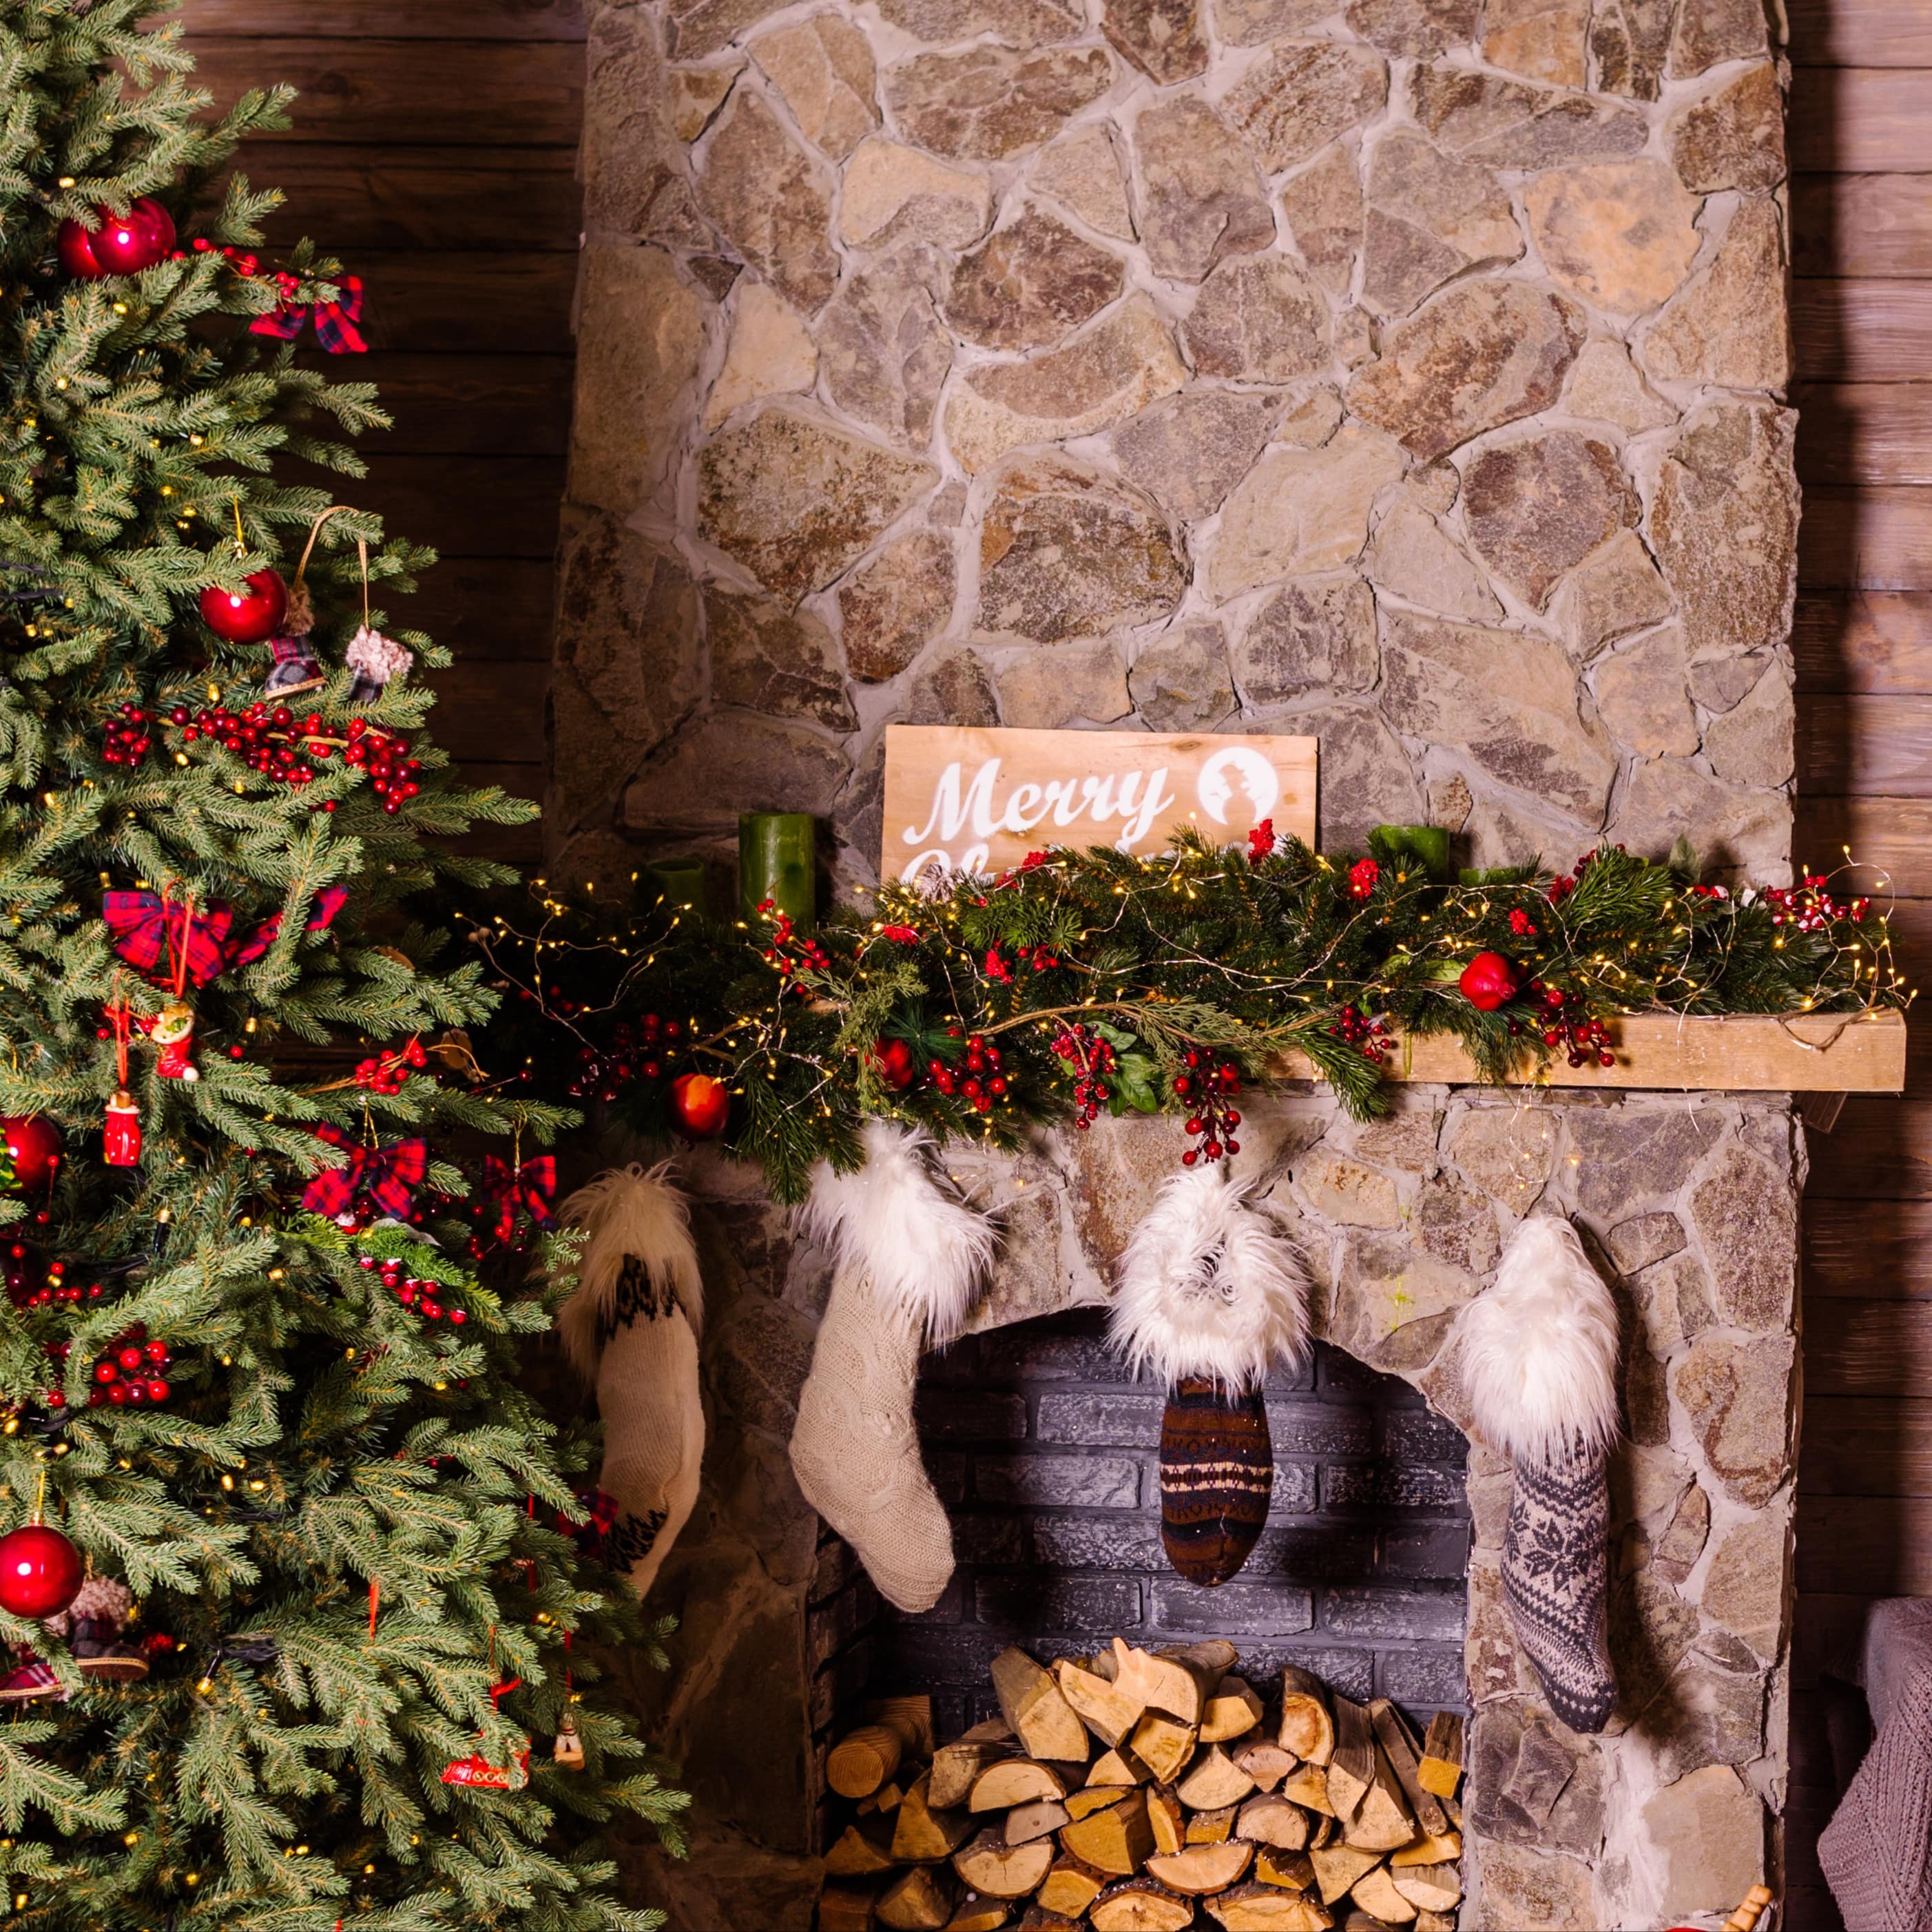 A festive fireplace and decorated tree in a vacation rental